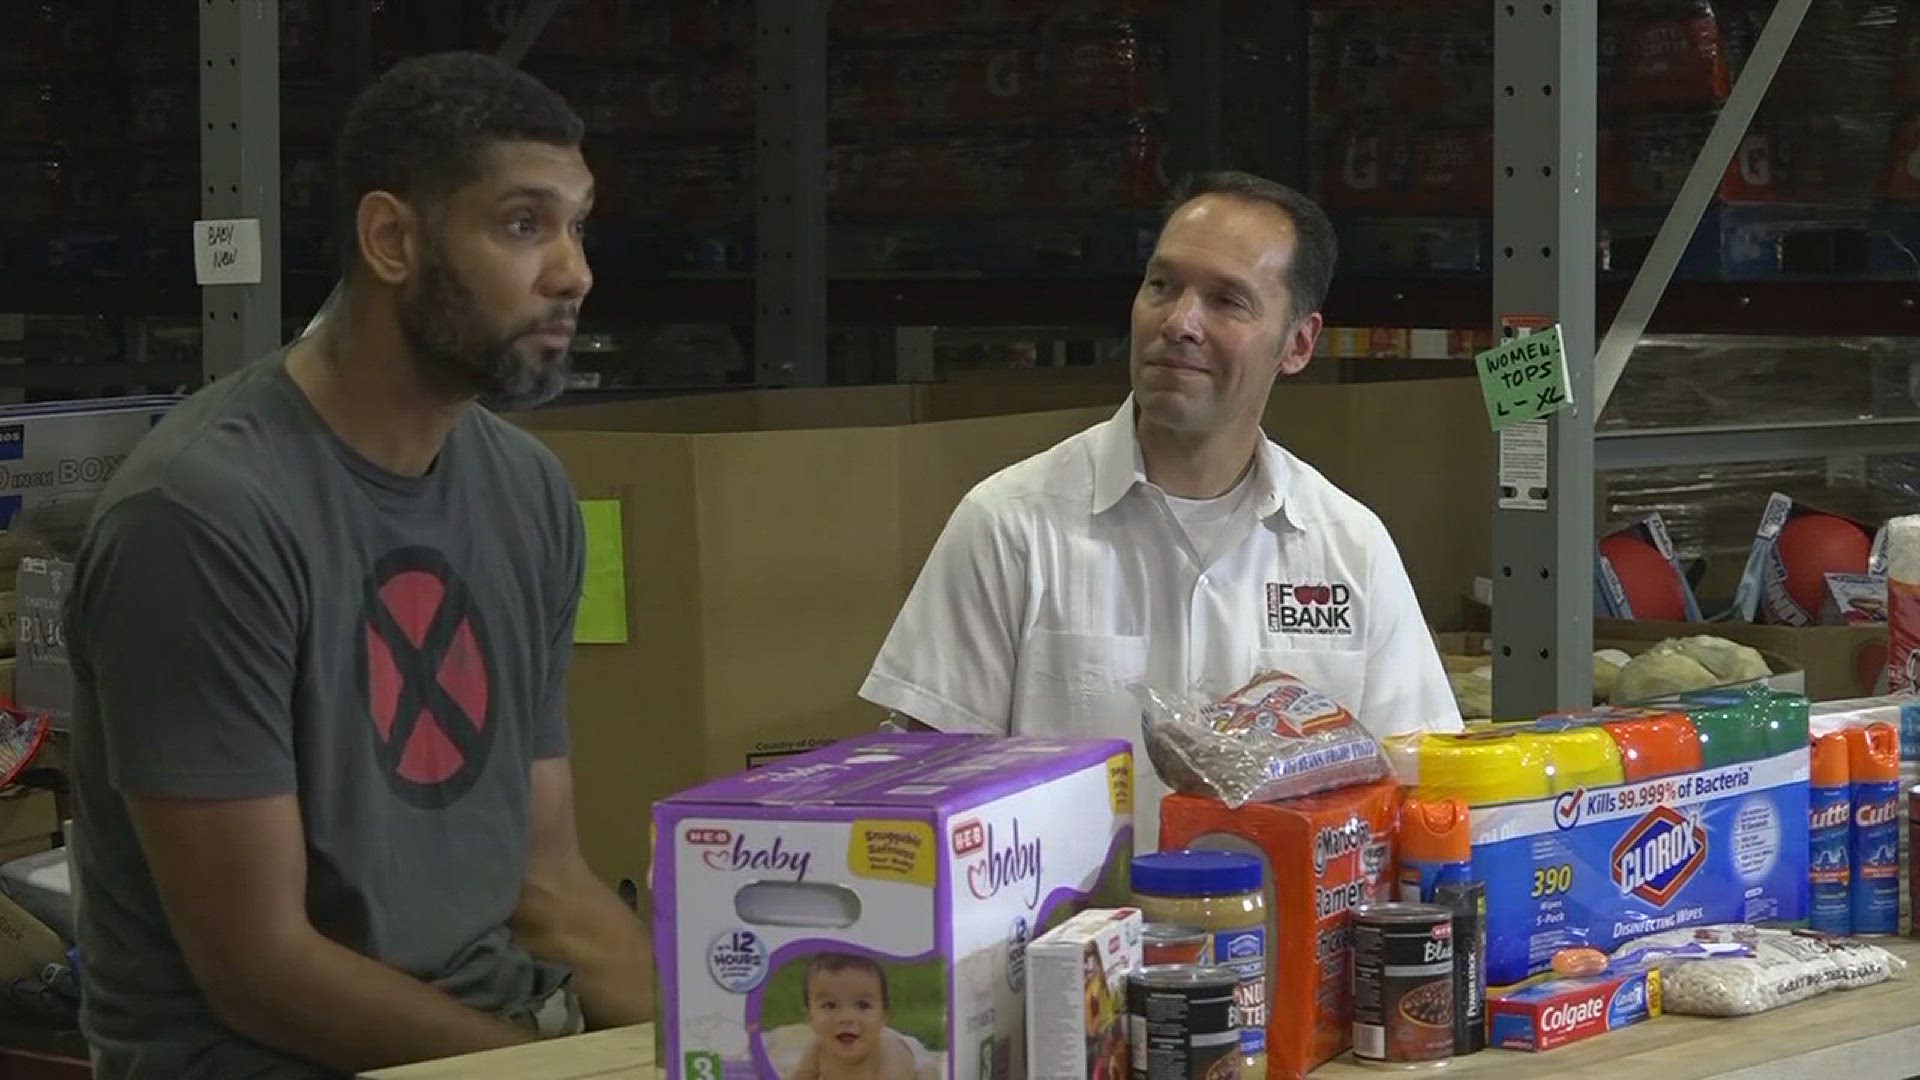 One of San Antonio's own superstars has stepped up in the relief effort for those impacted by Hurricane Irma. Tim Duncan partnered with the San Antonio Food Bank to create the Tim Duncan Virgin Islands Relief Fund.